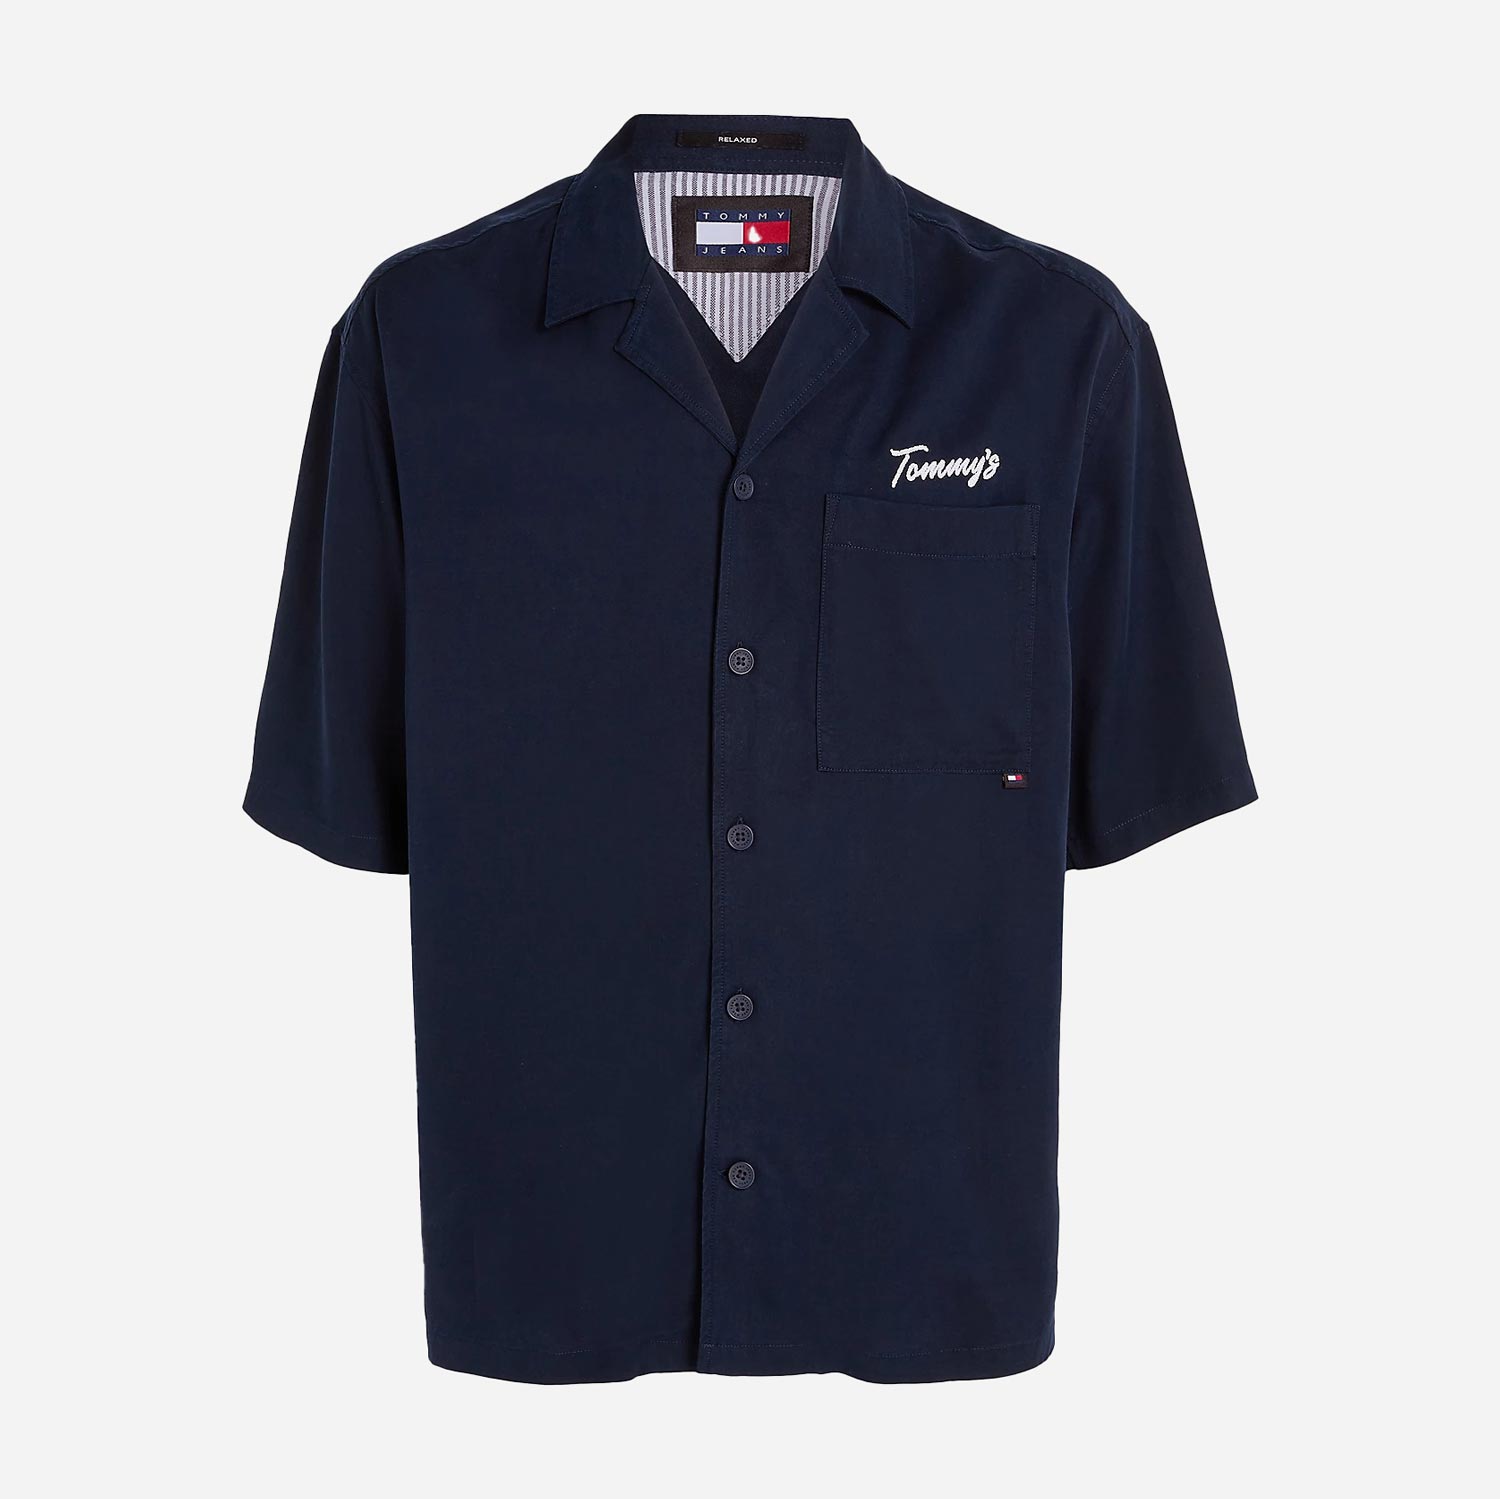 Tommy Jeans Graphic Resort Relaxed Fit Short Sleeve Shirt - Dark Night Navy